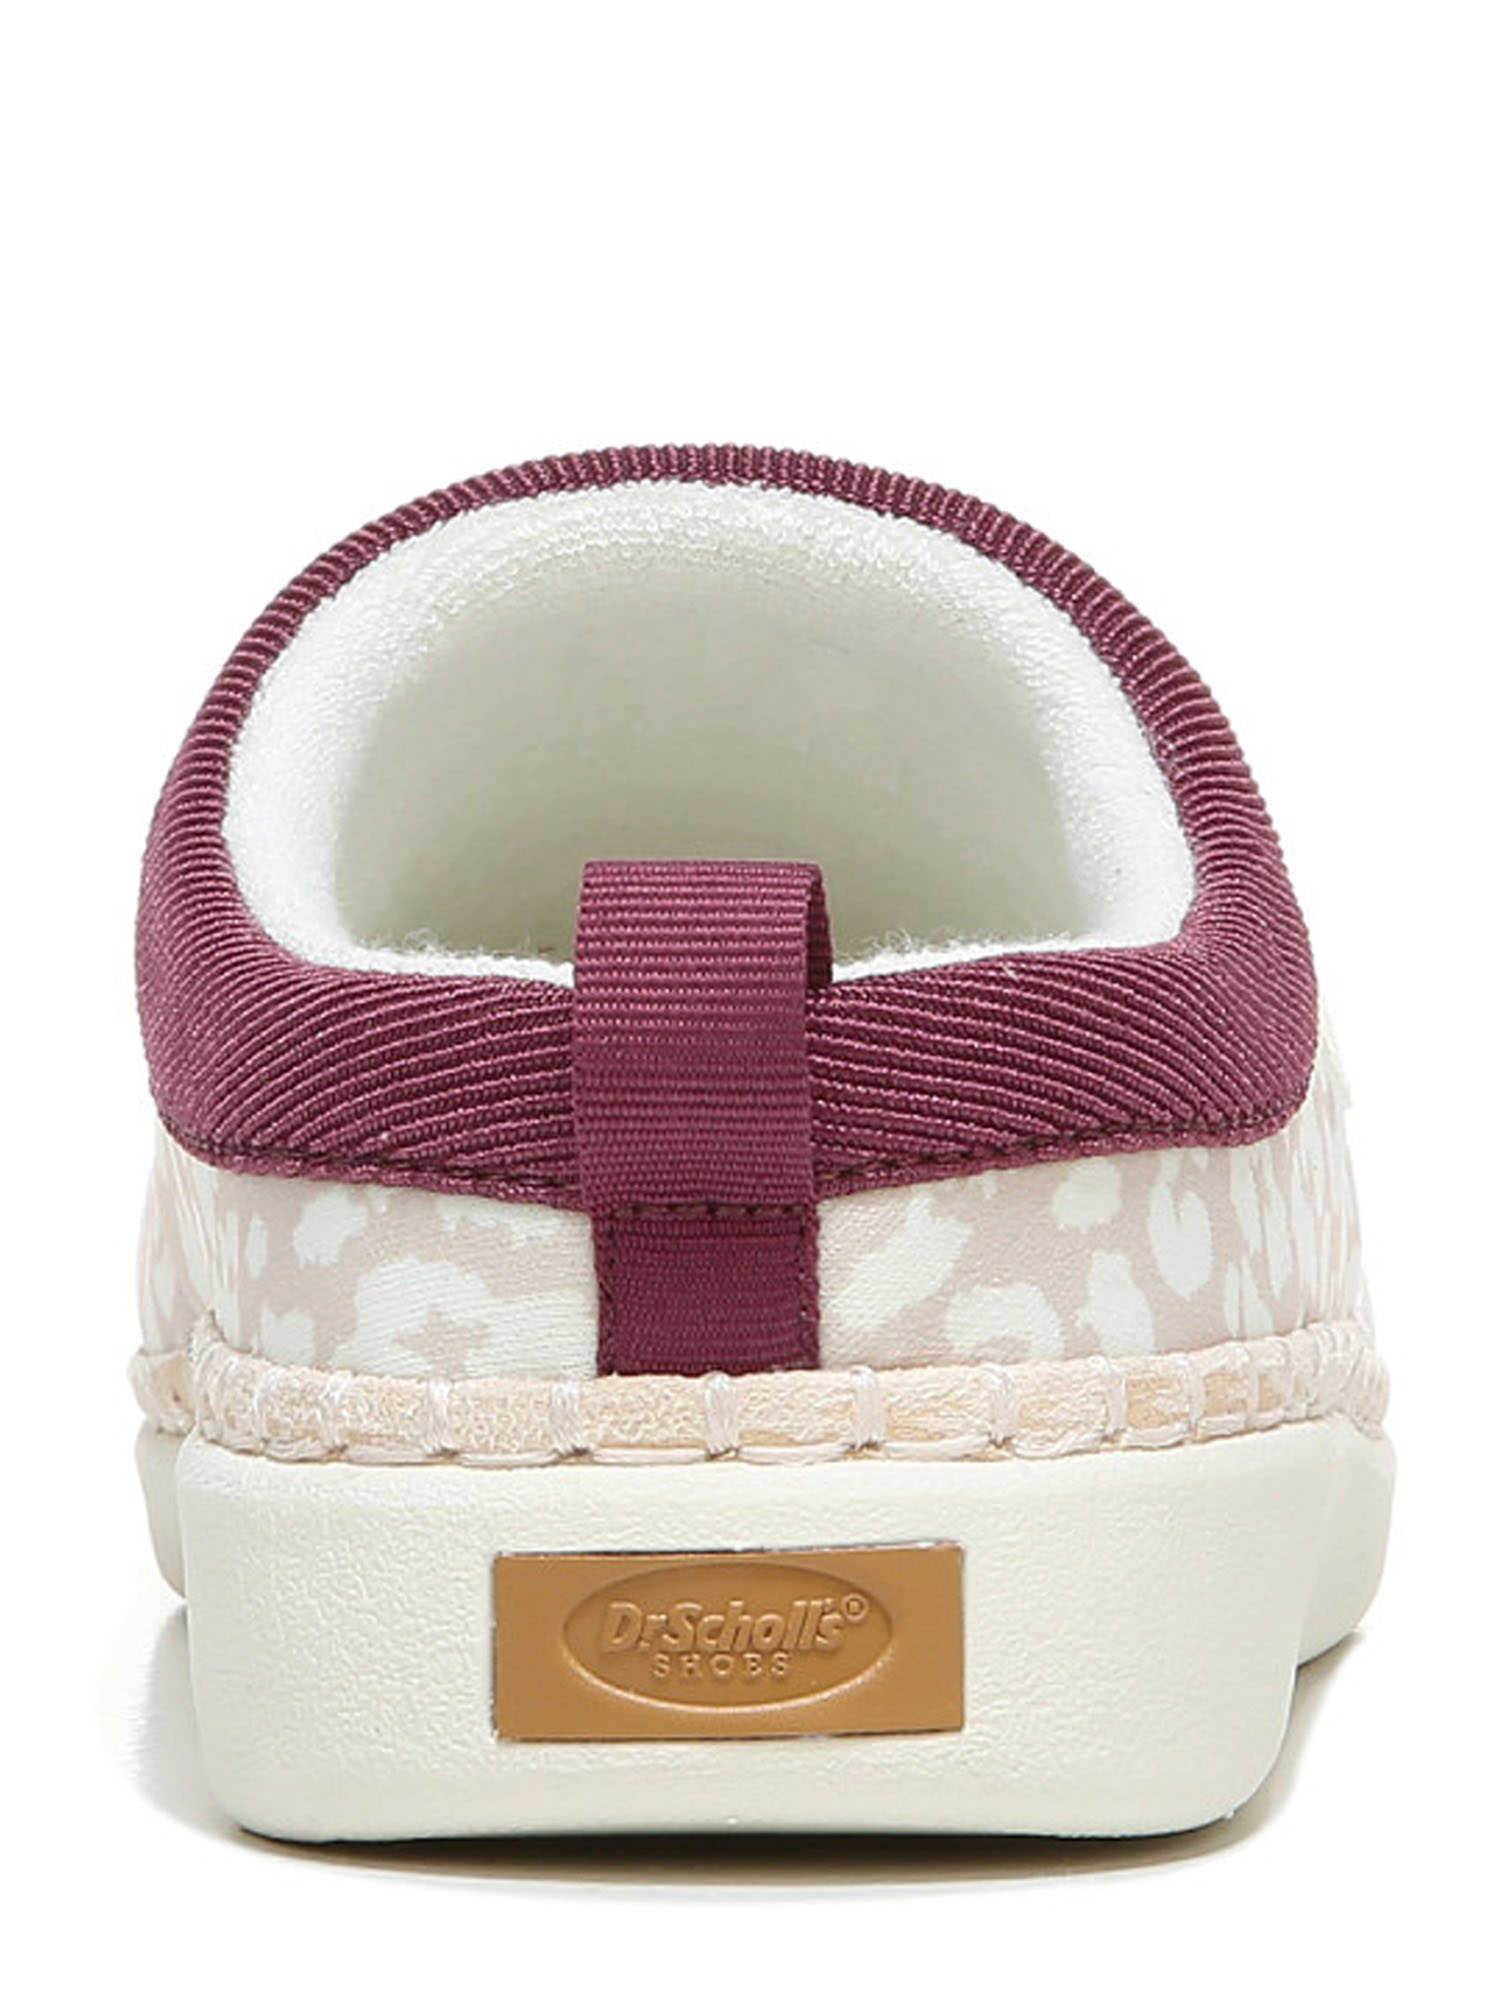 Dr. Scholl's Women's Cozy Vibes Quilted Slipper - image 3 of 6